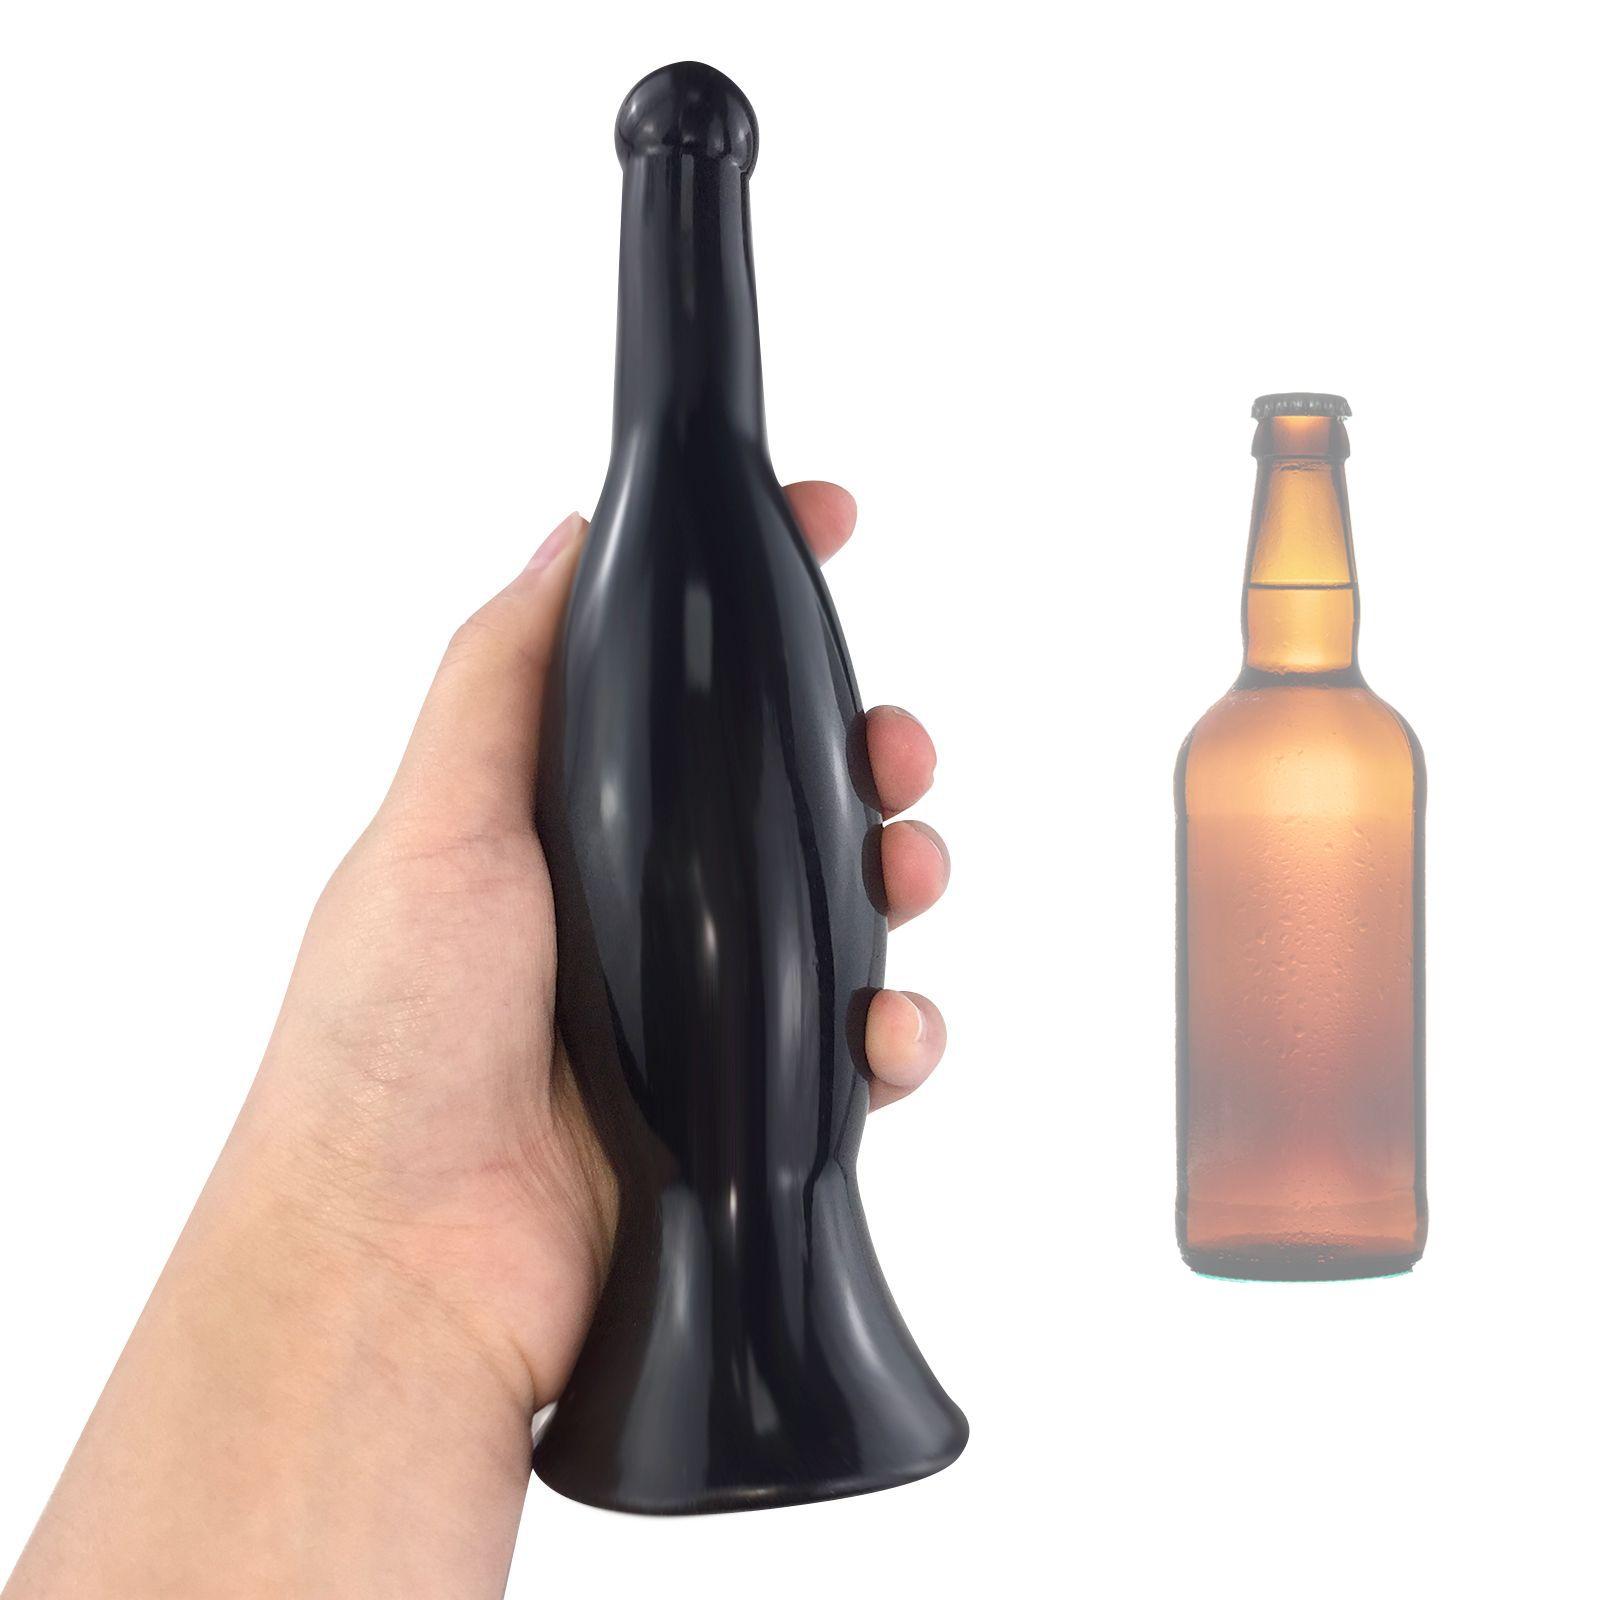 Novel Beer Bottle Shape 20-27.5cm Xxl Dildo Anal Plug Set Butt Plugs Trainer Anus Intercourse Sexy Toy For Men Women And Couple